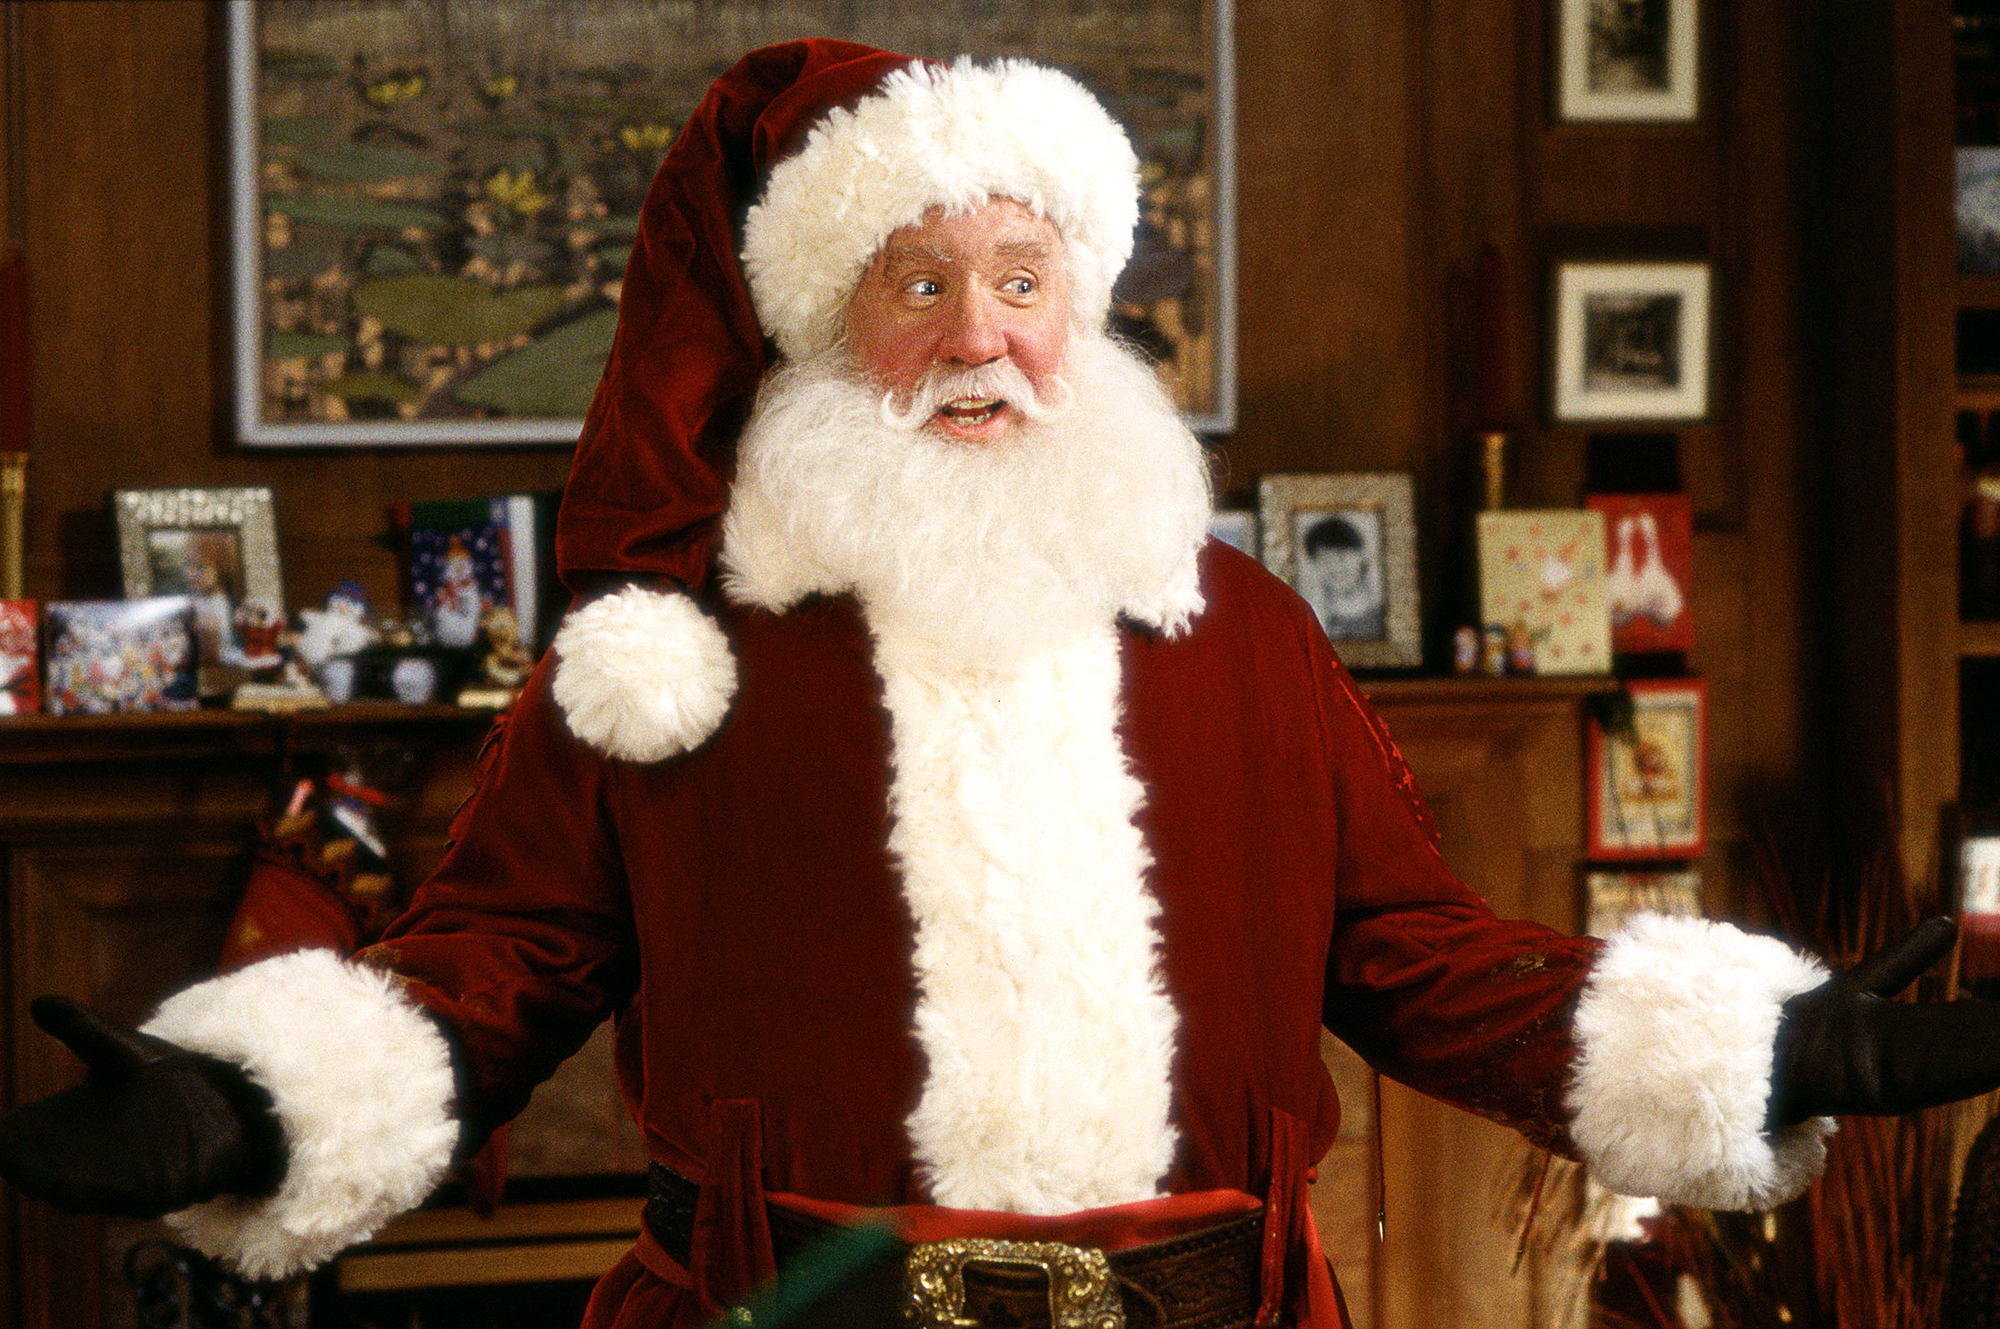 Disney’s ‘The Santa Clause’ Sequel Series Finds A Director